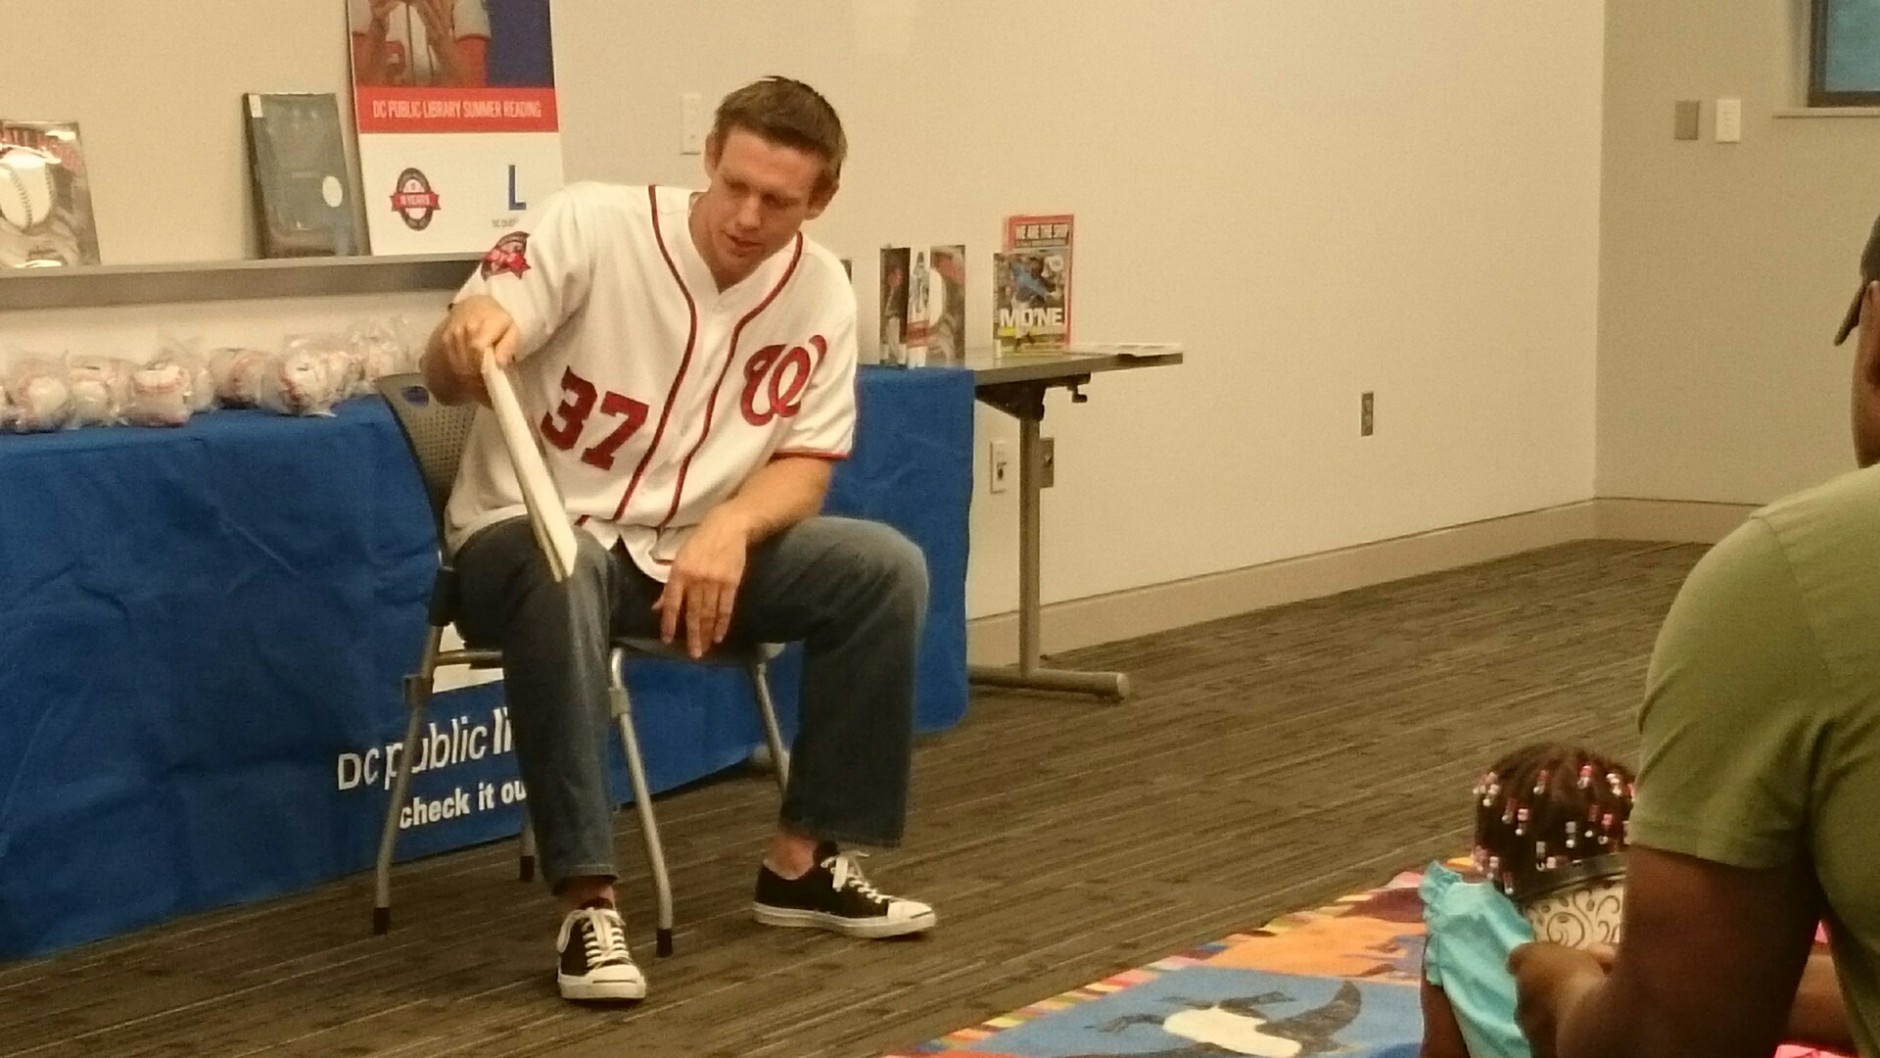 Washington Nationals starting pitcher Stephen Strasburg  reads a story to young fans at the Anacostia Library in Washington, D.C., on Saturday,  July 18, 2015. ( Dennis J. Foley/WTOP)